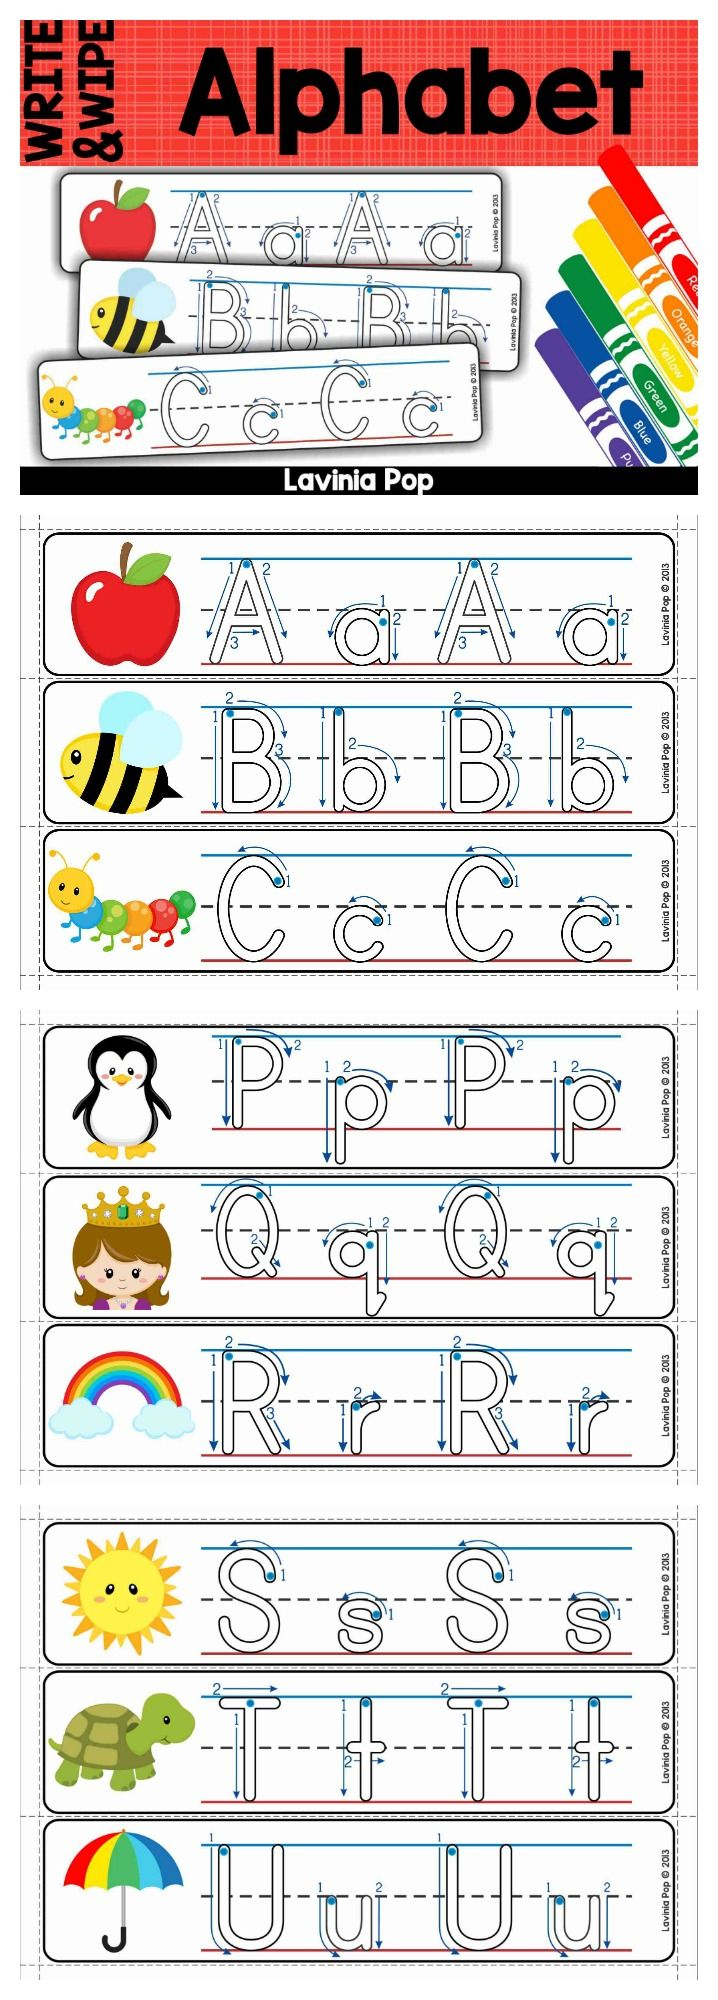 Alphabet Write And Wipe With Correct Letter Formation inside Tracing Letters With Directional Arrows Font